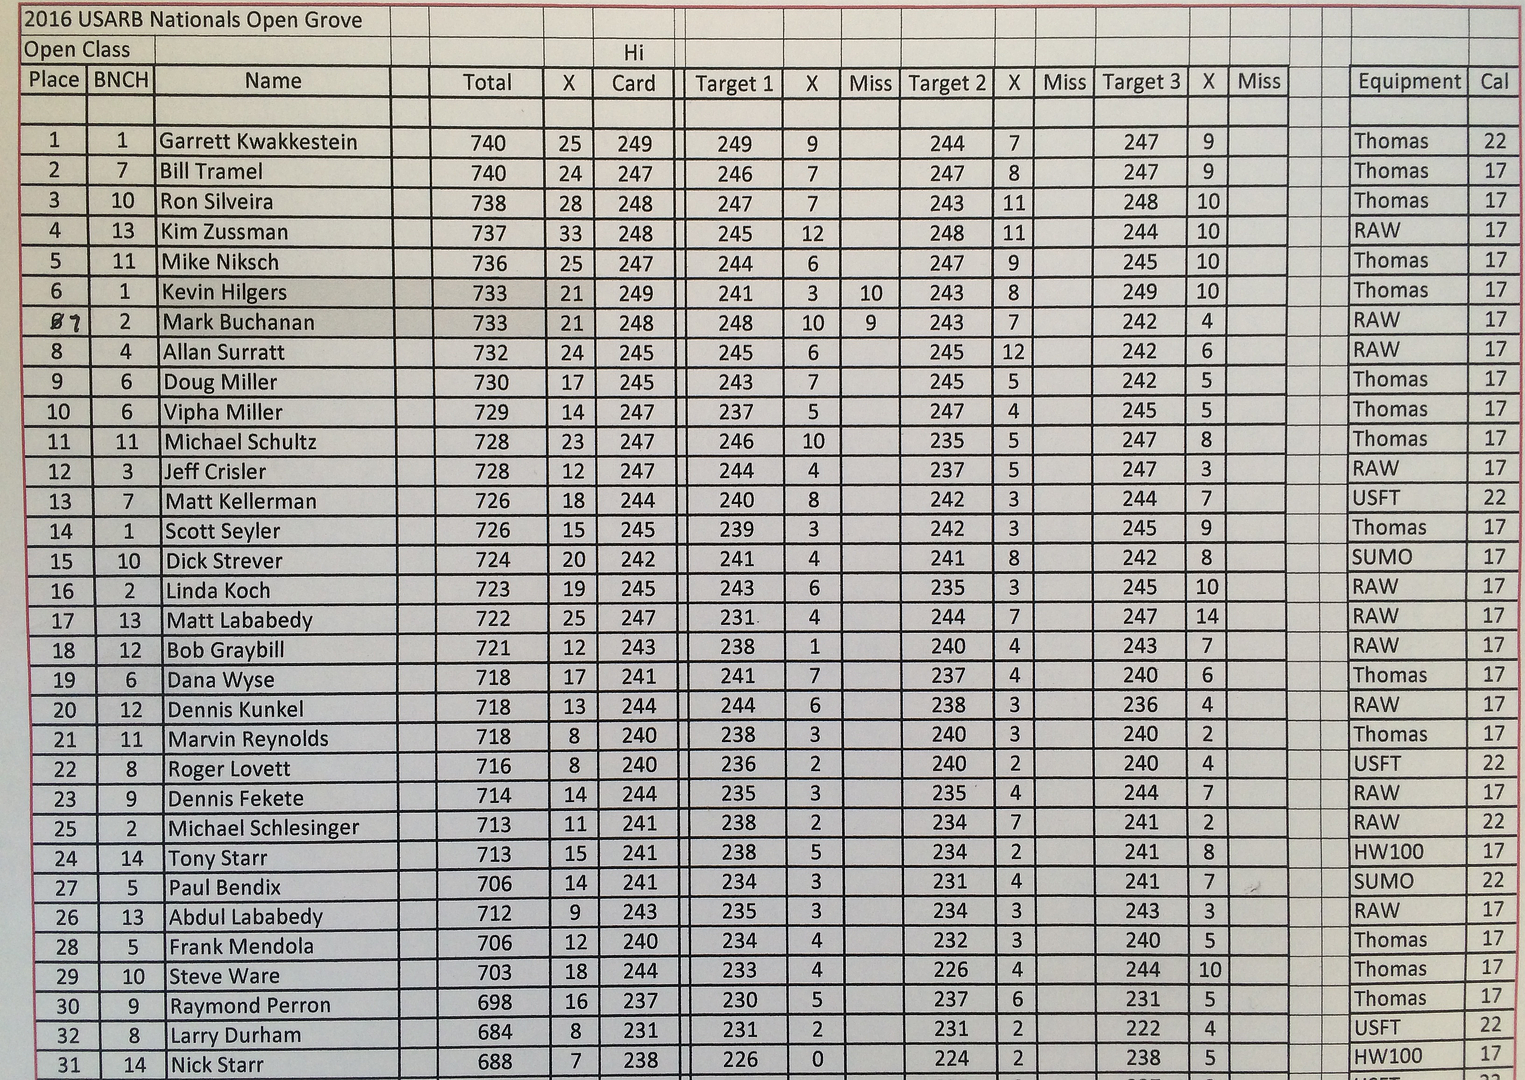 US%20National%202016%20Benchrest%20Open%20results_zpspf2kuowg.png